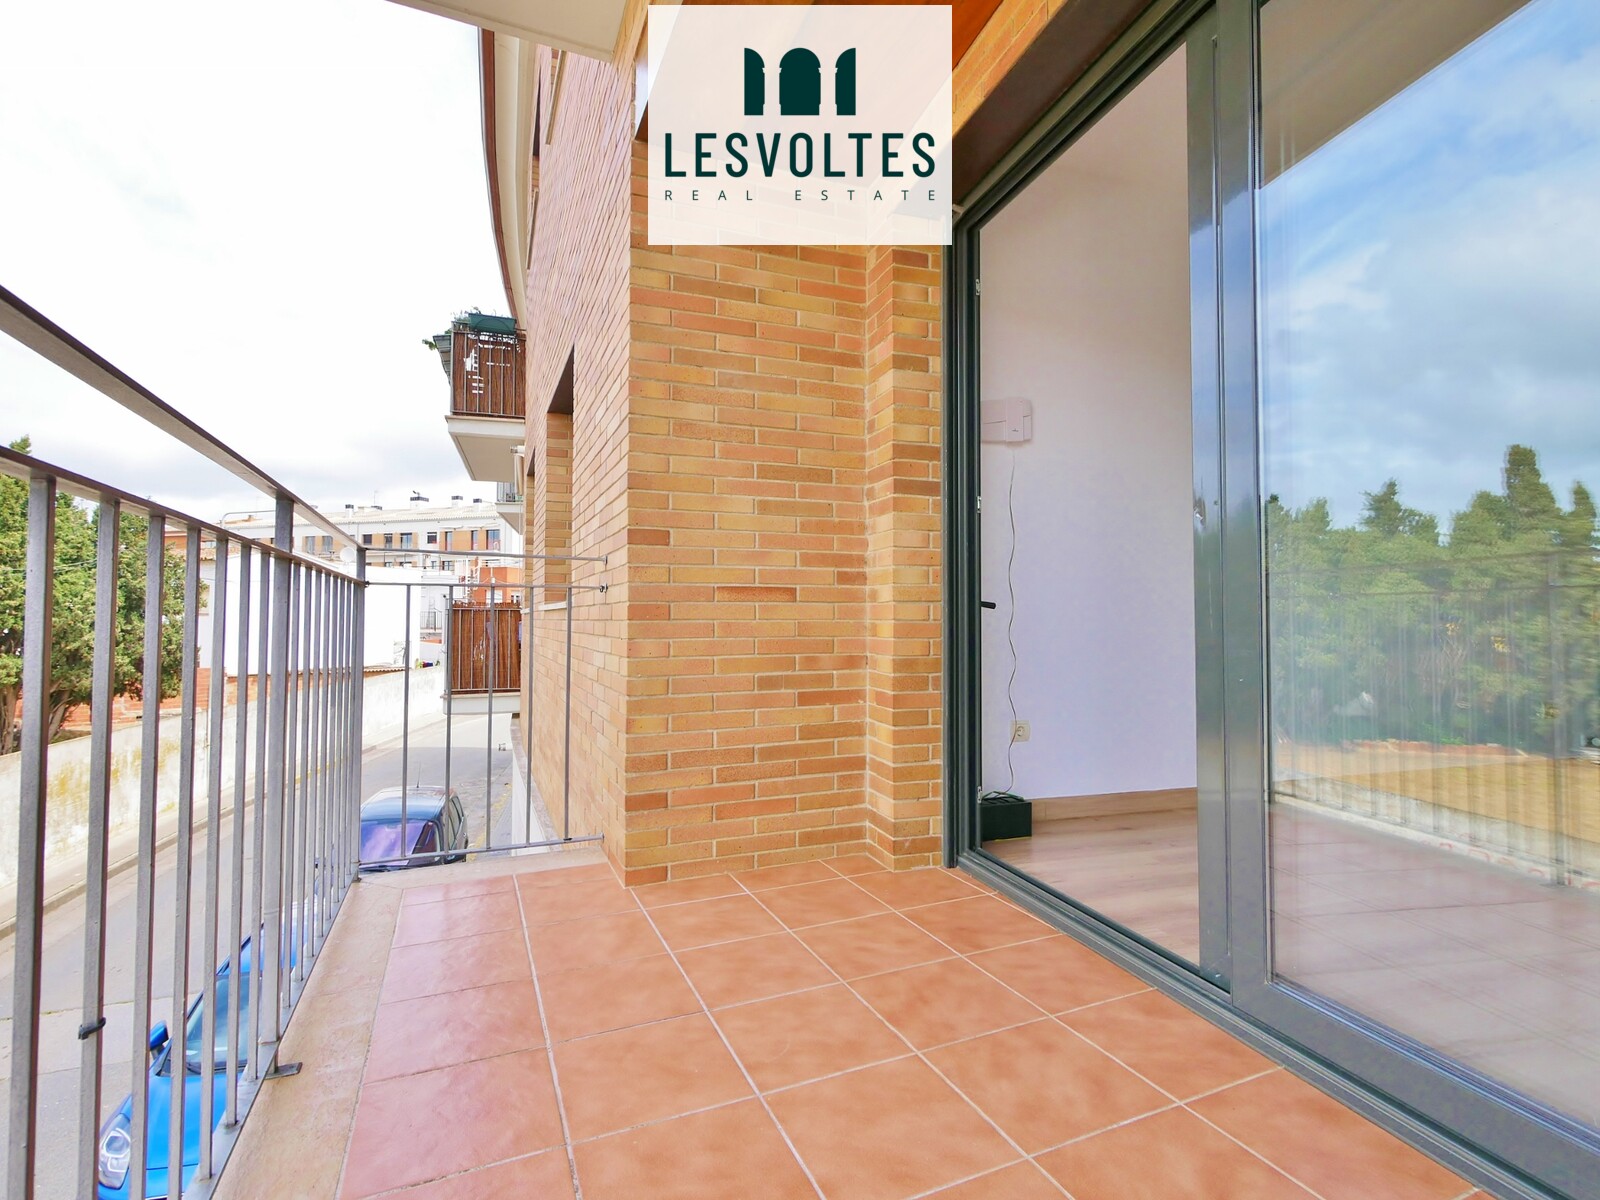 NEW 2 BEDROOM APARTMENT WITH PARKING NEAR TO THE CENTER OF PALAFRUGELL